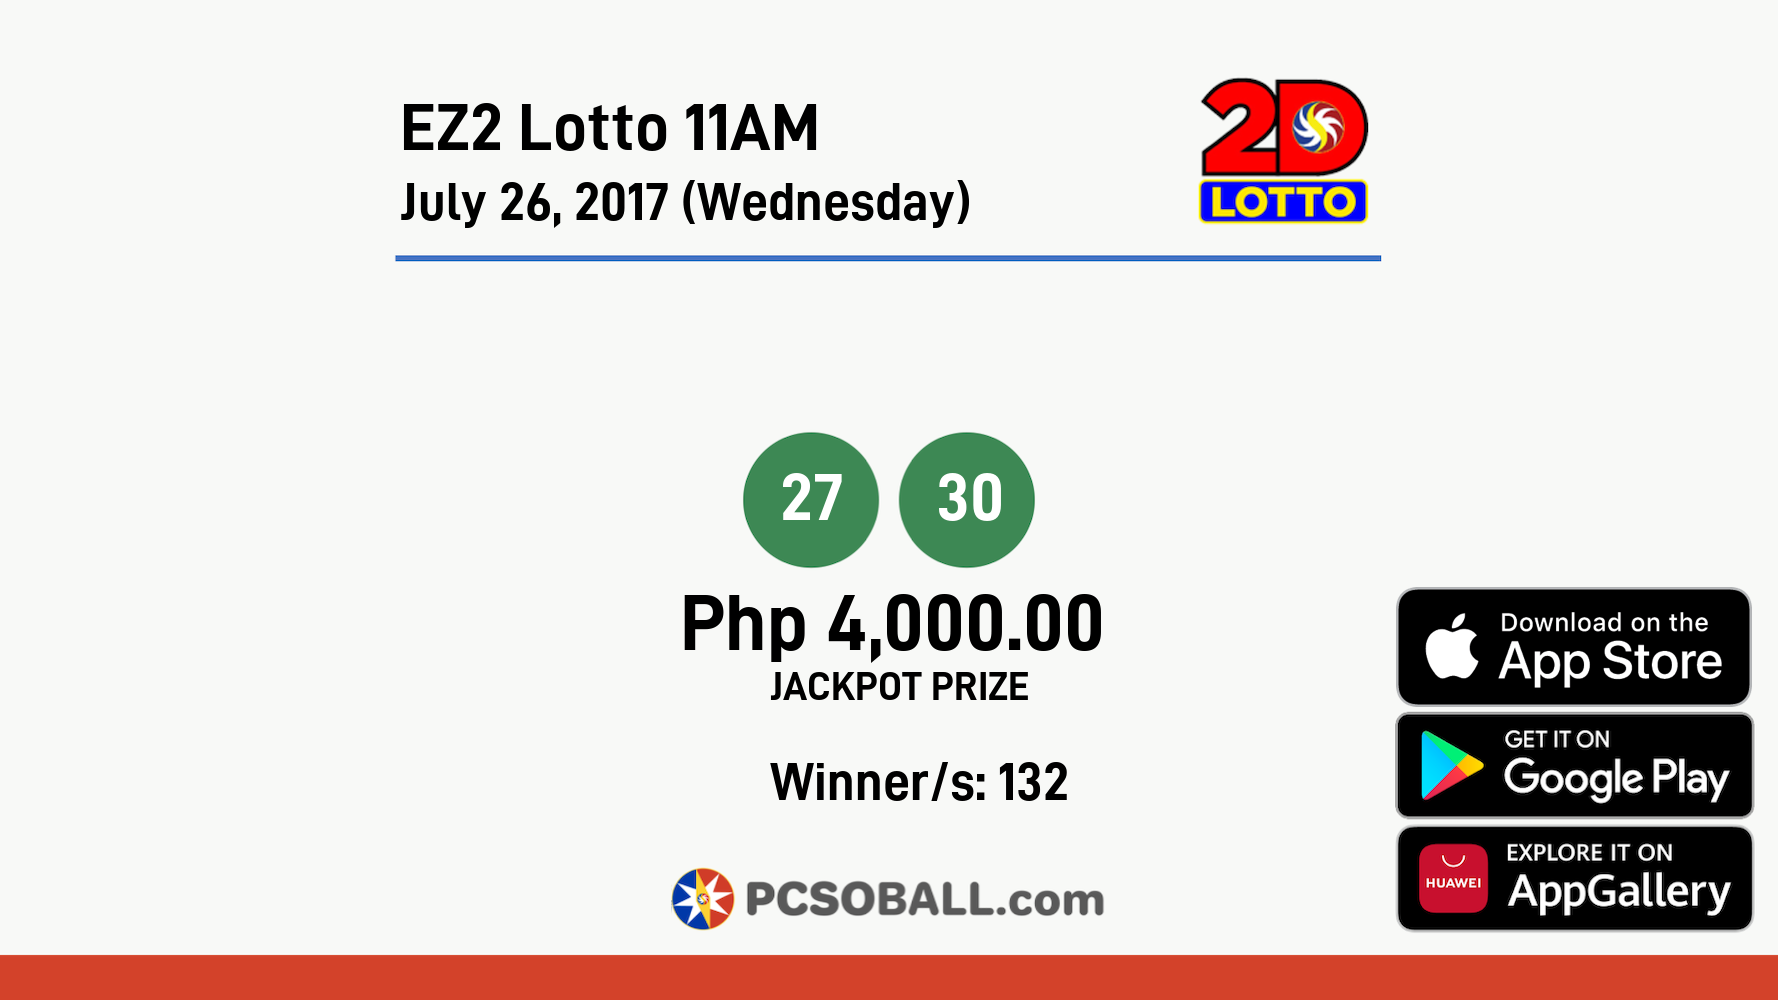 EZ2 Lotto 11AM July 26, 2017 (Wednesday) Result